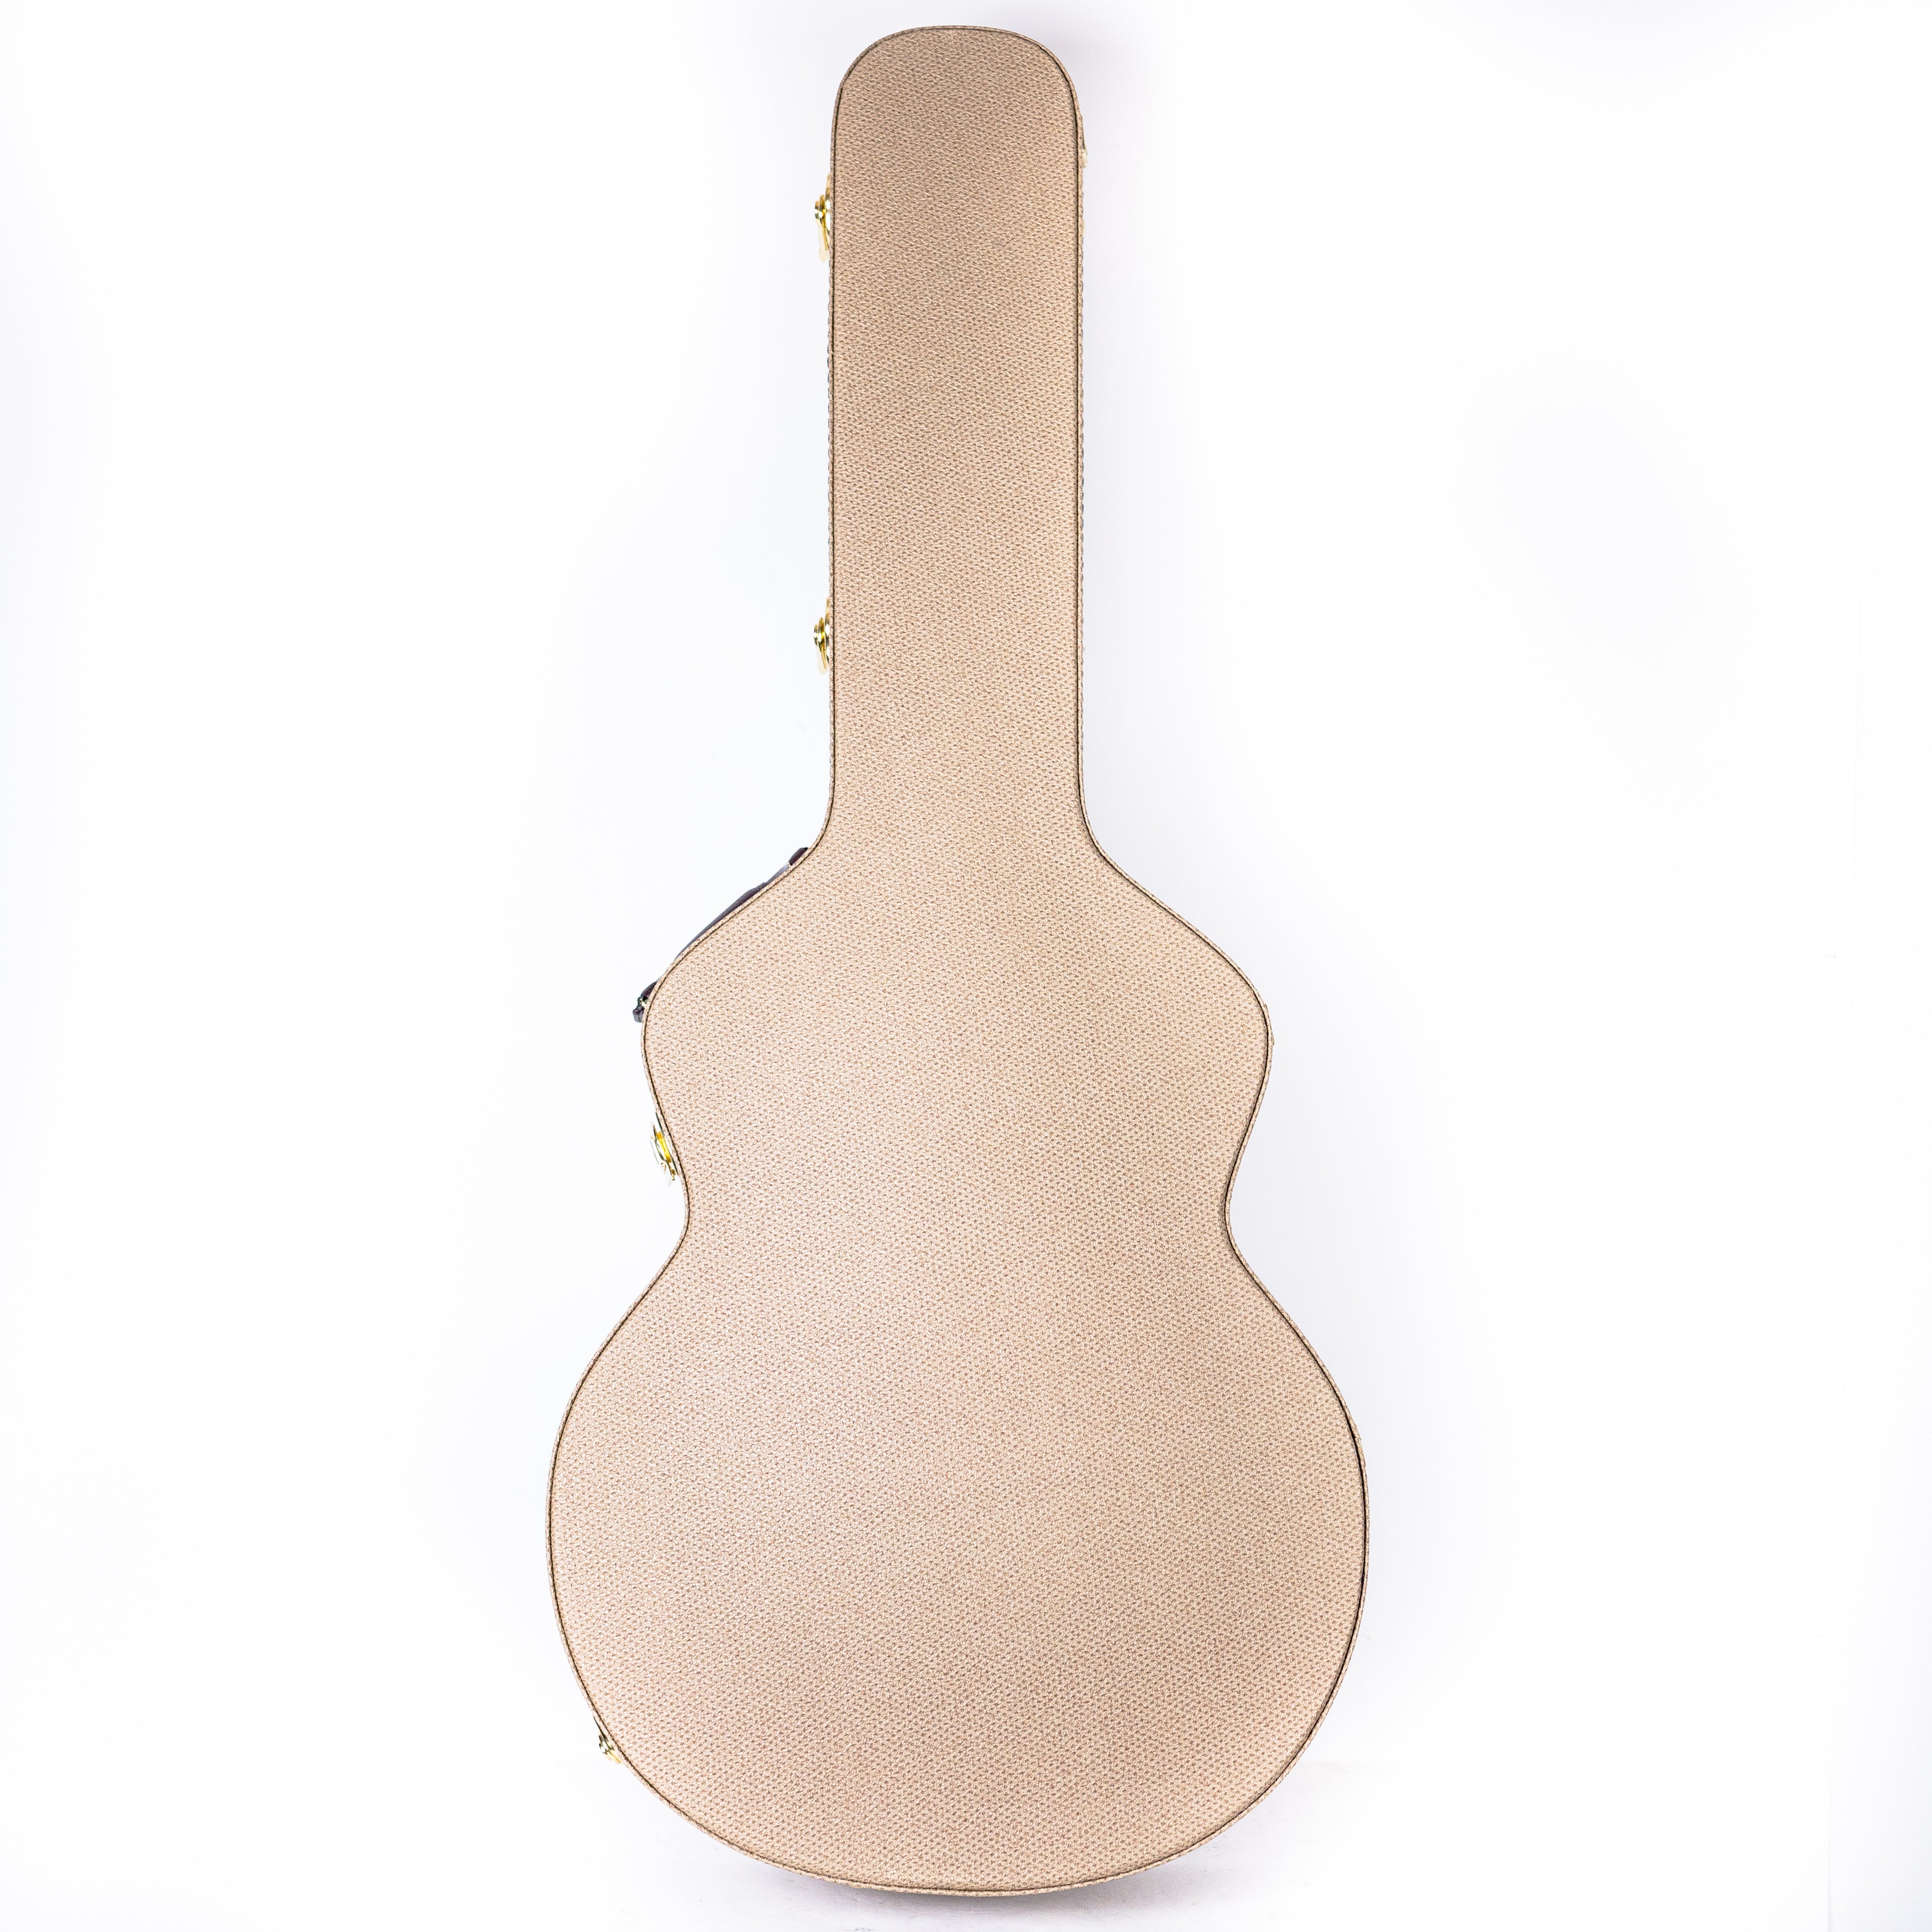 Comins GCS-16-2 Archtop in Blonde